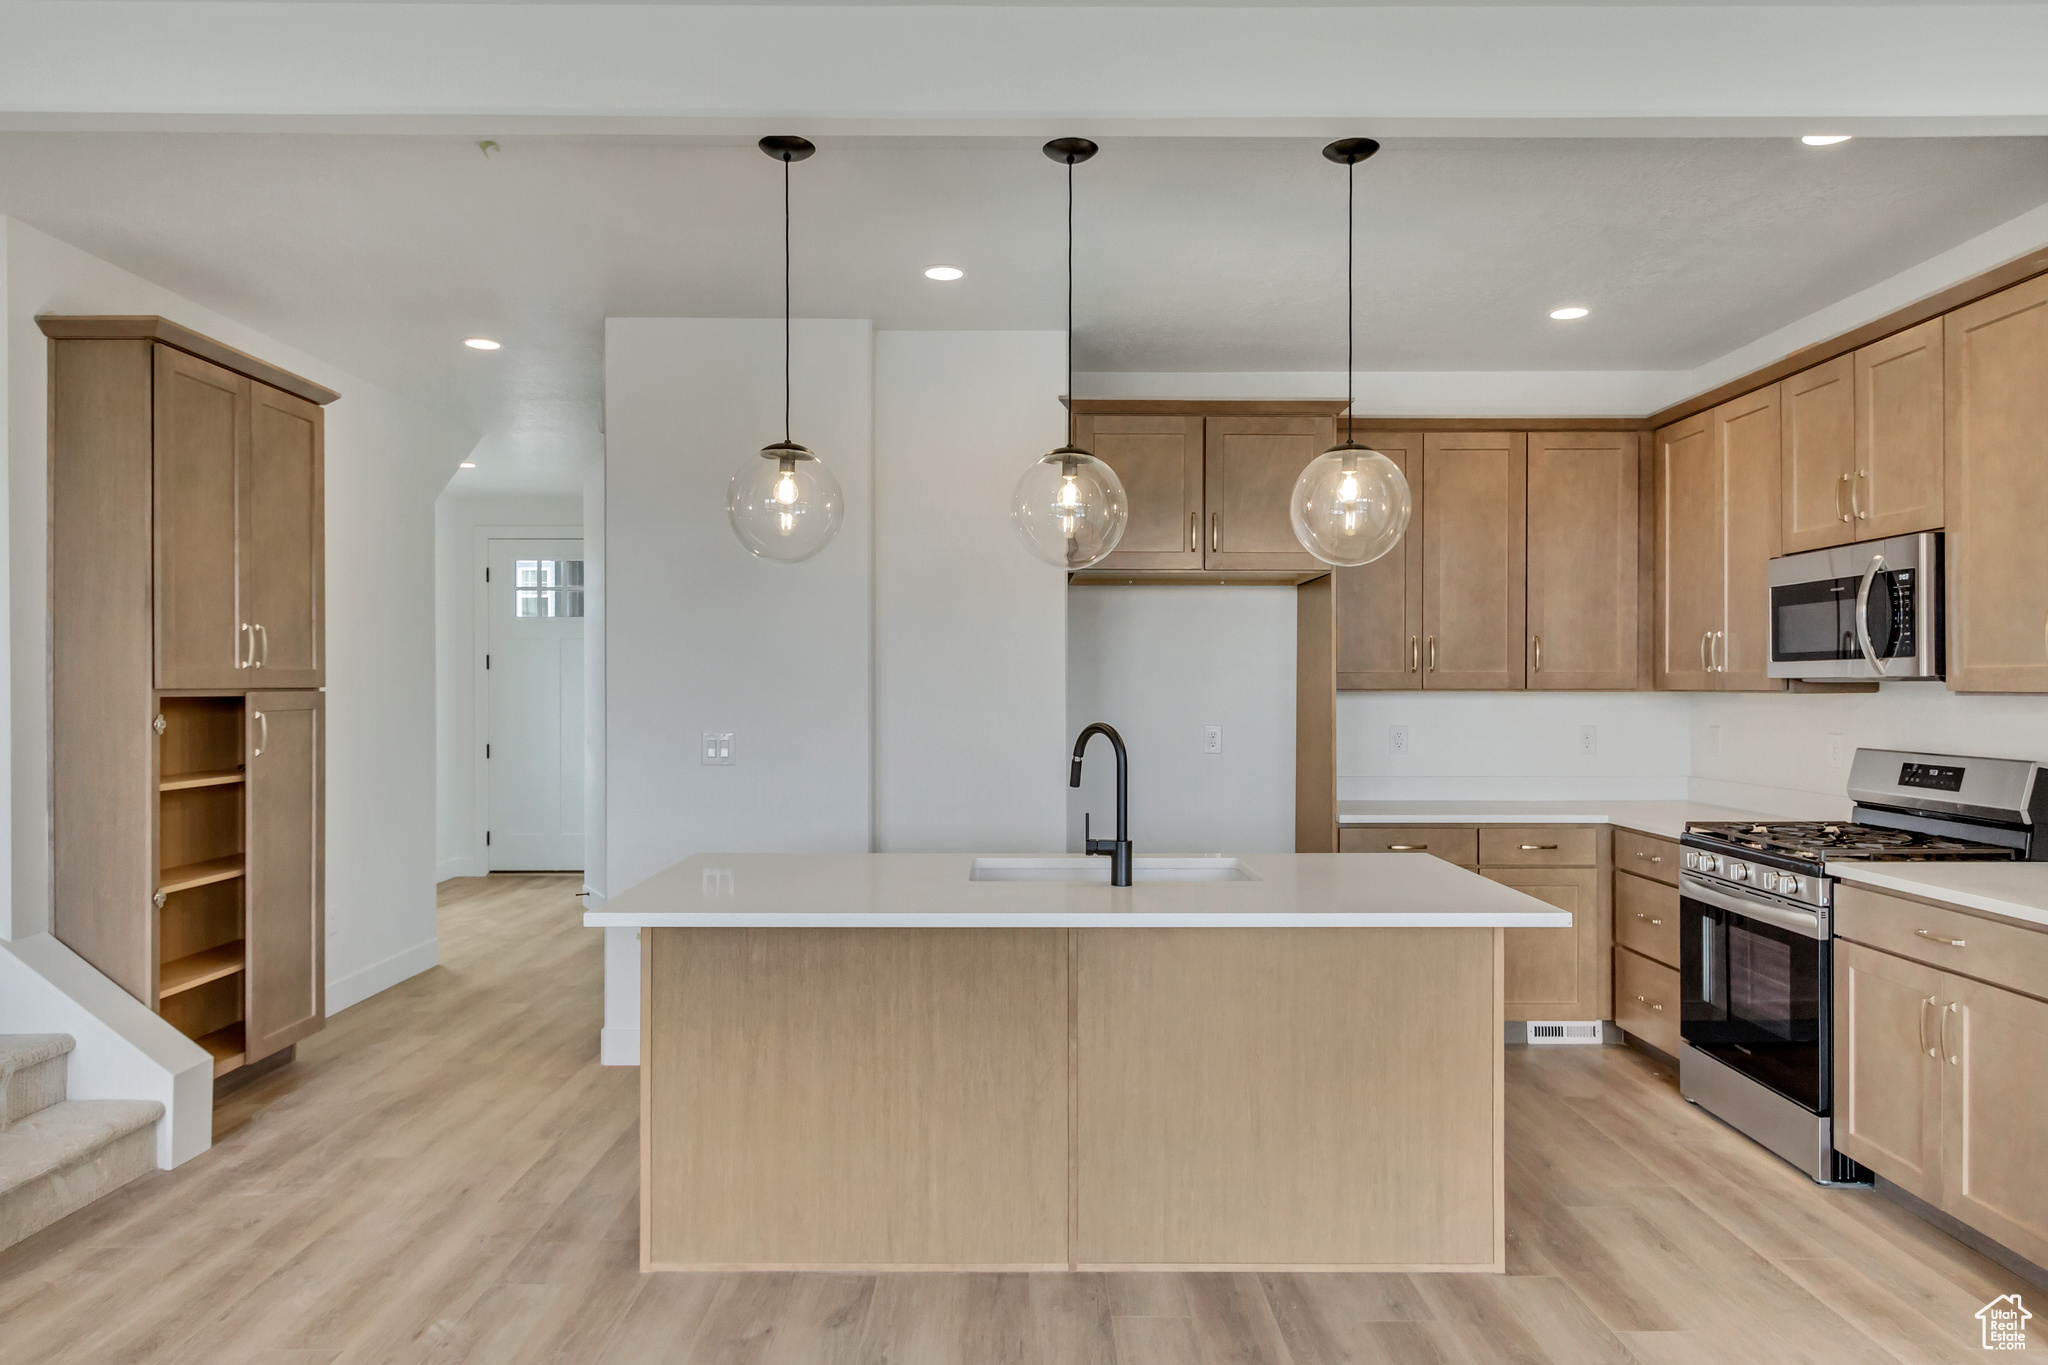 Kitchen featuring appliances with stainless steel finishes, sink, light wood-type flooring, hanging light fixtures, and a kitchen island with sink